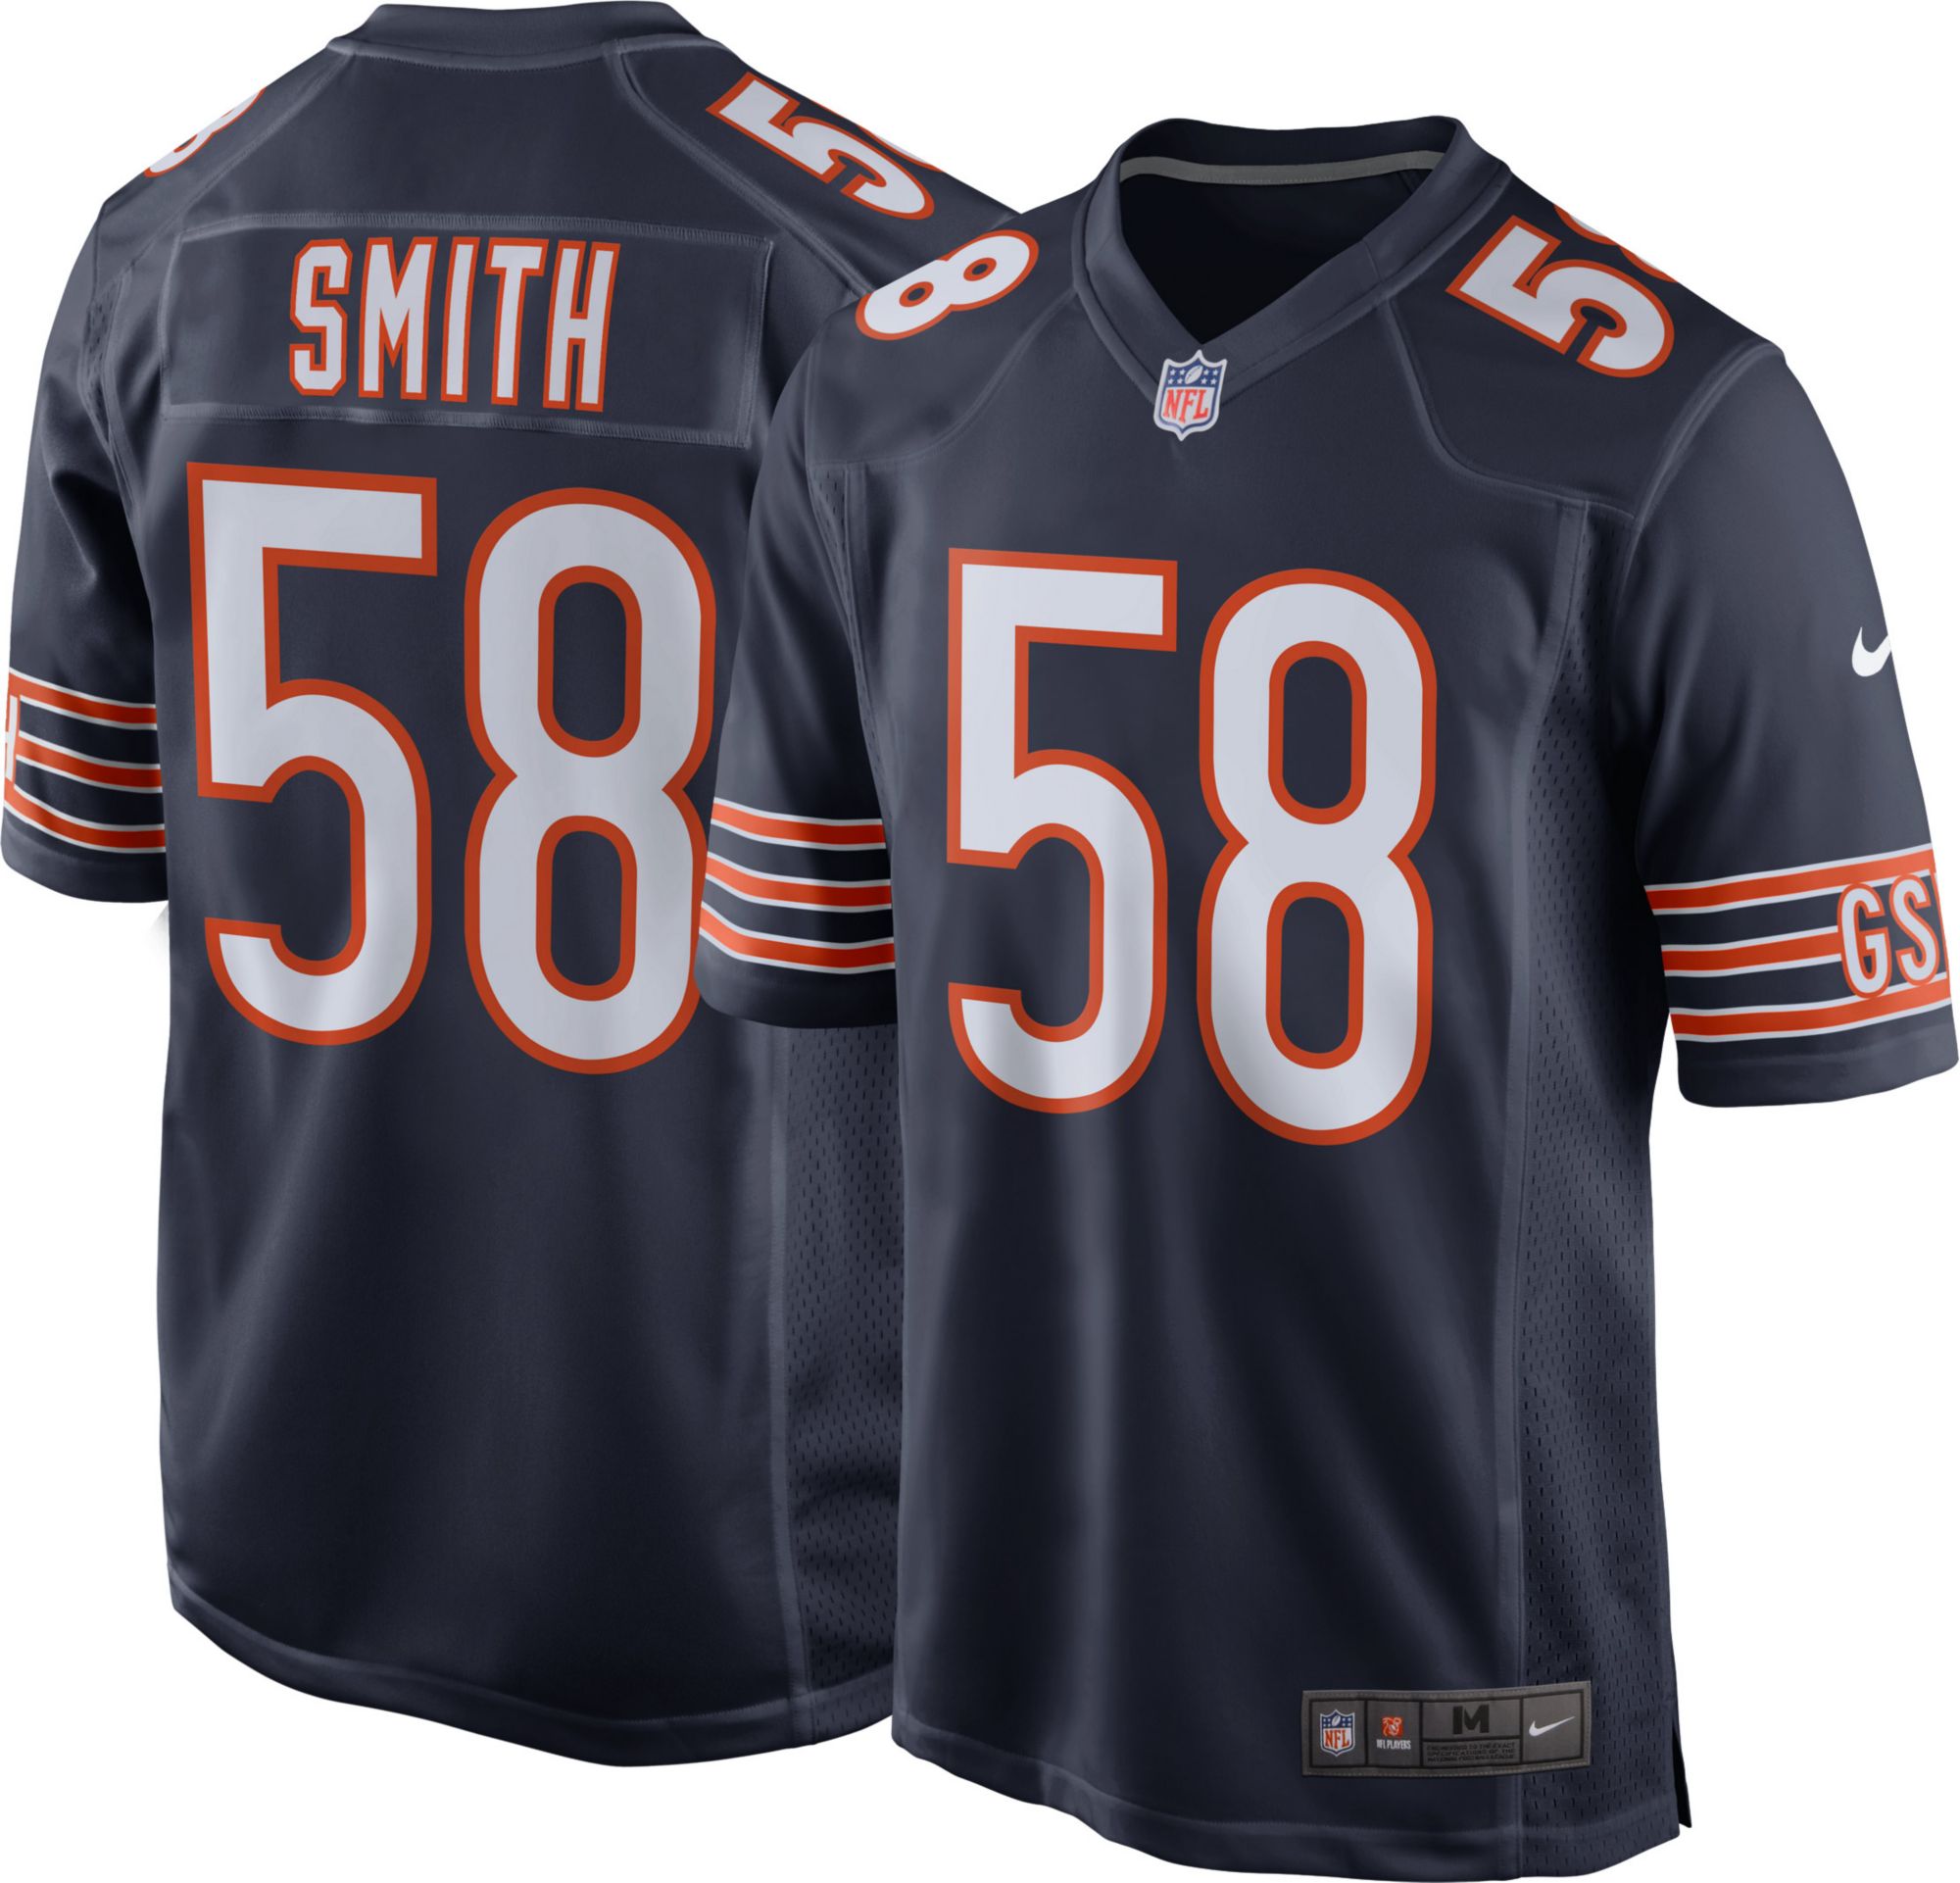 smith jersey